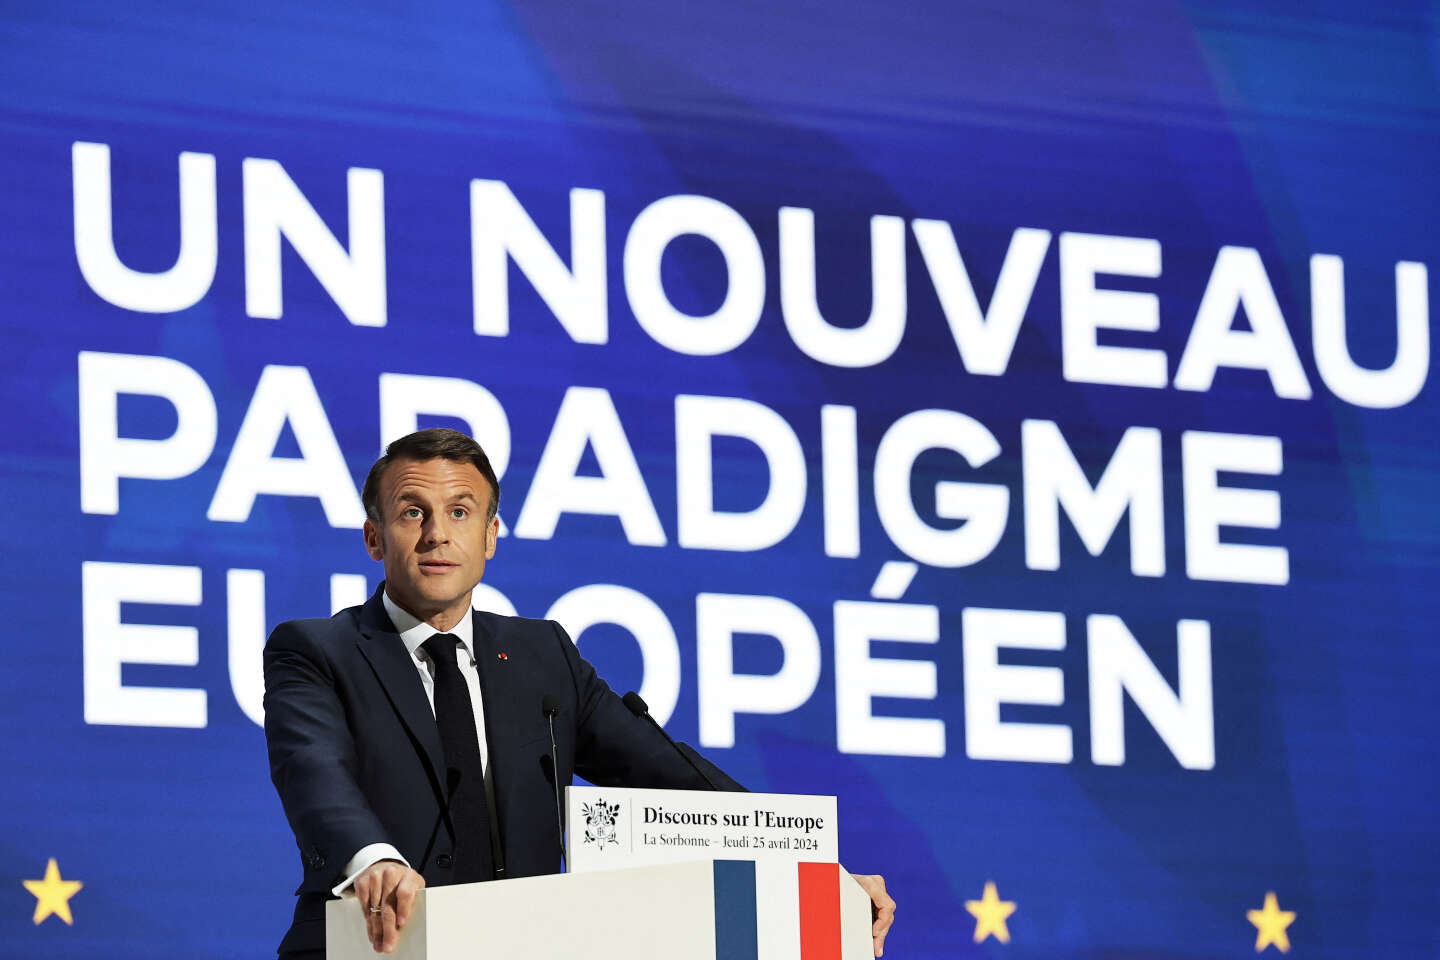 Climate change and the environment take a back seat in Emmanuel Macron's speech on Europe